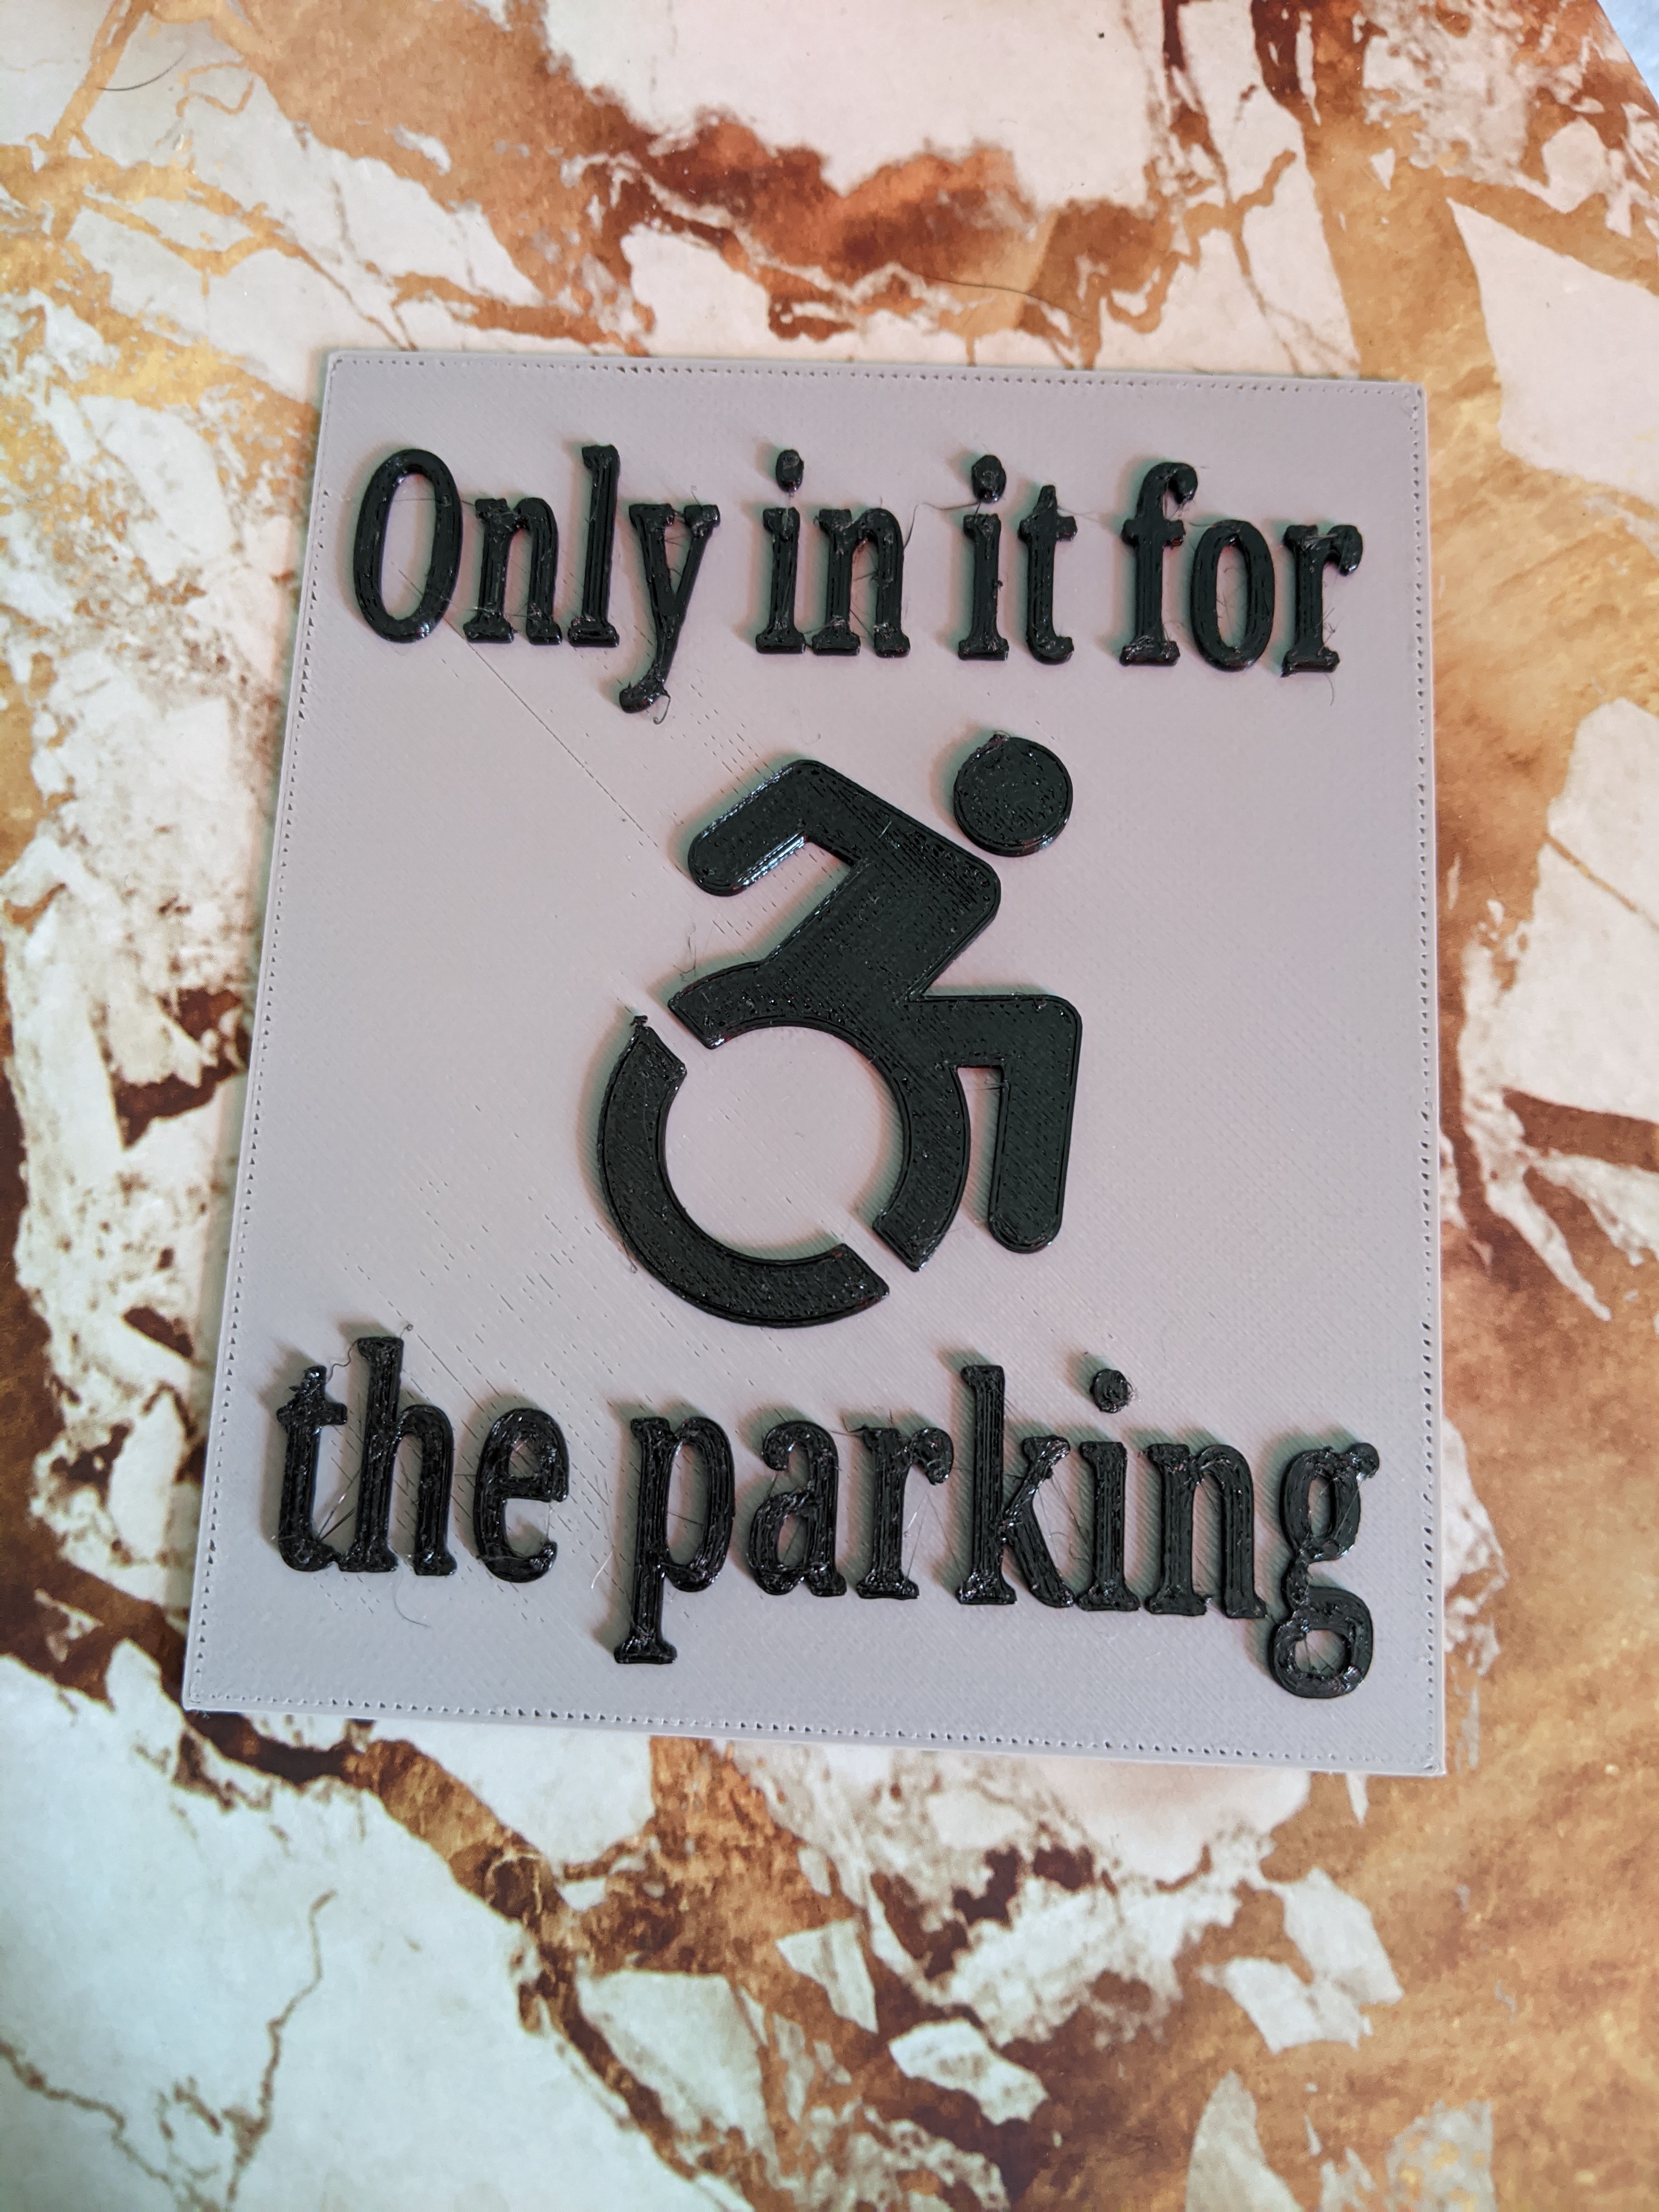 I'm only in it [wheelchair] for the parking